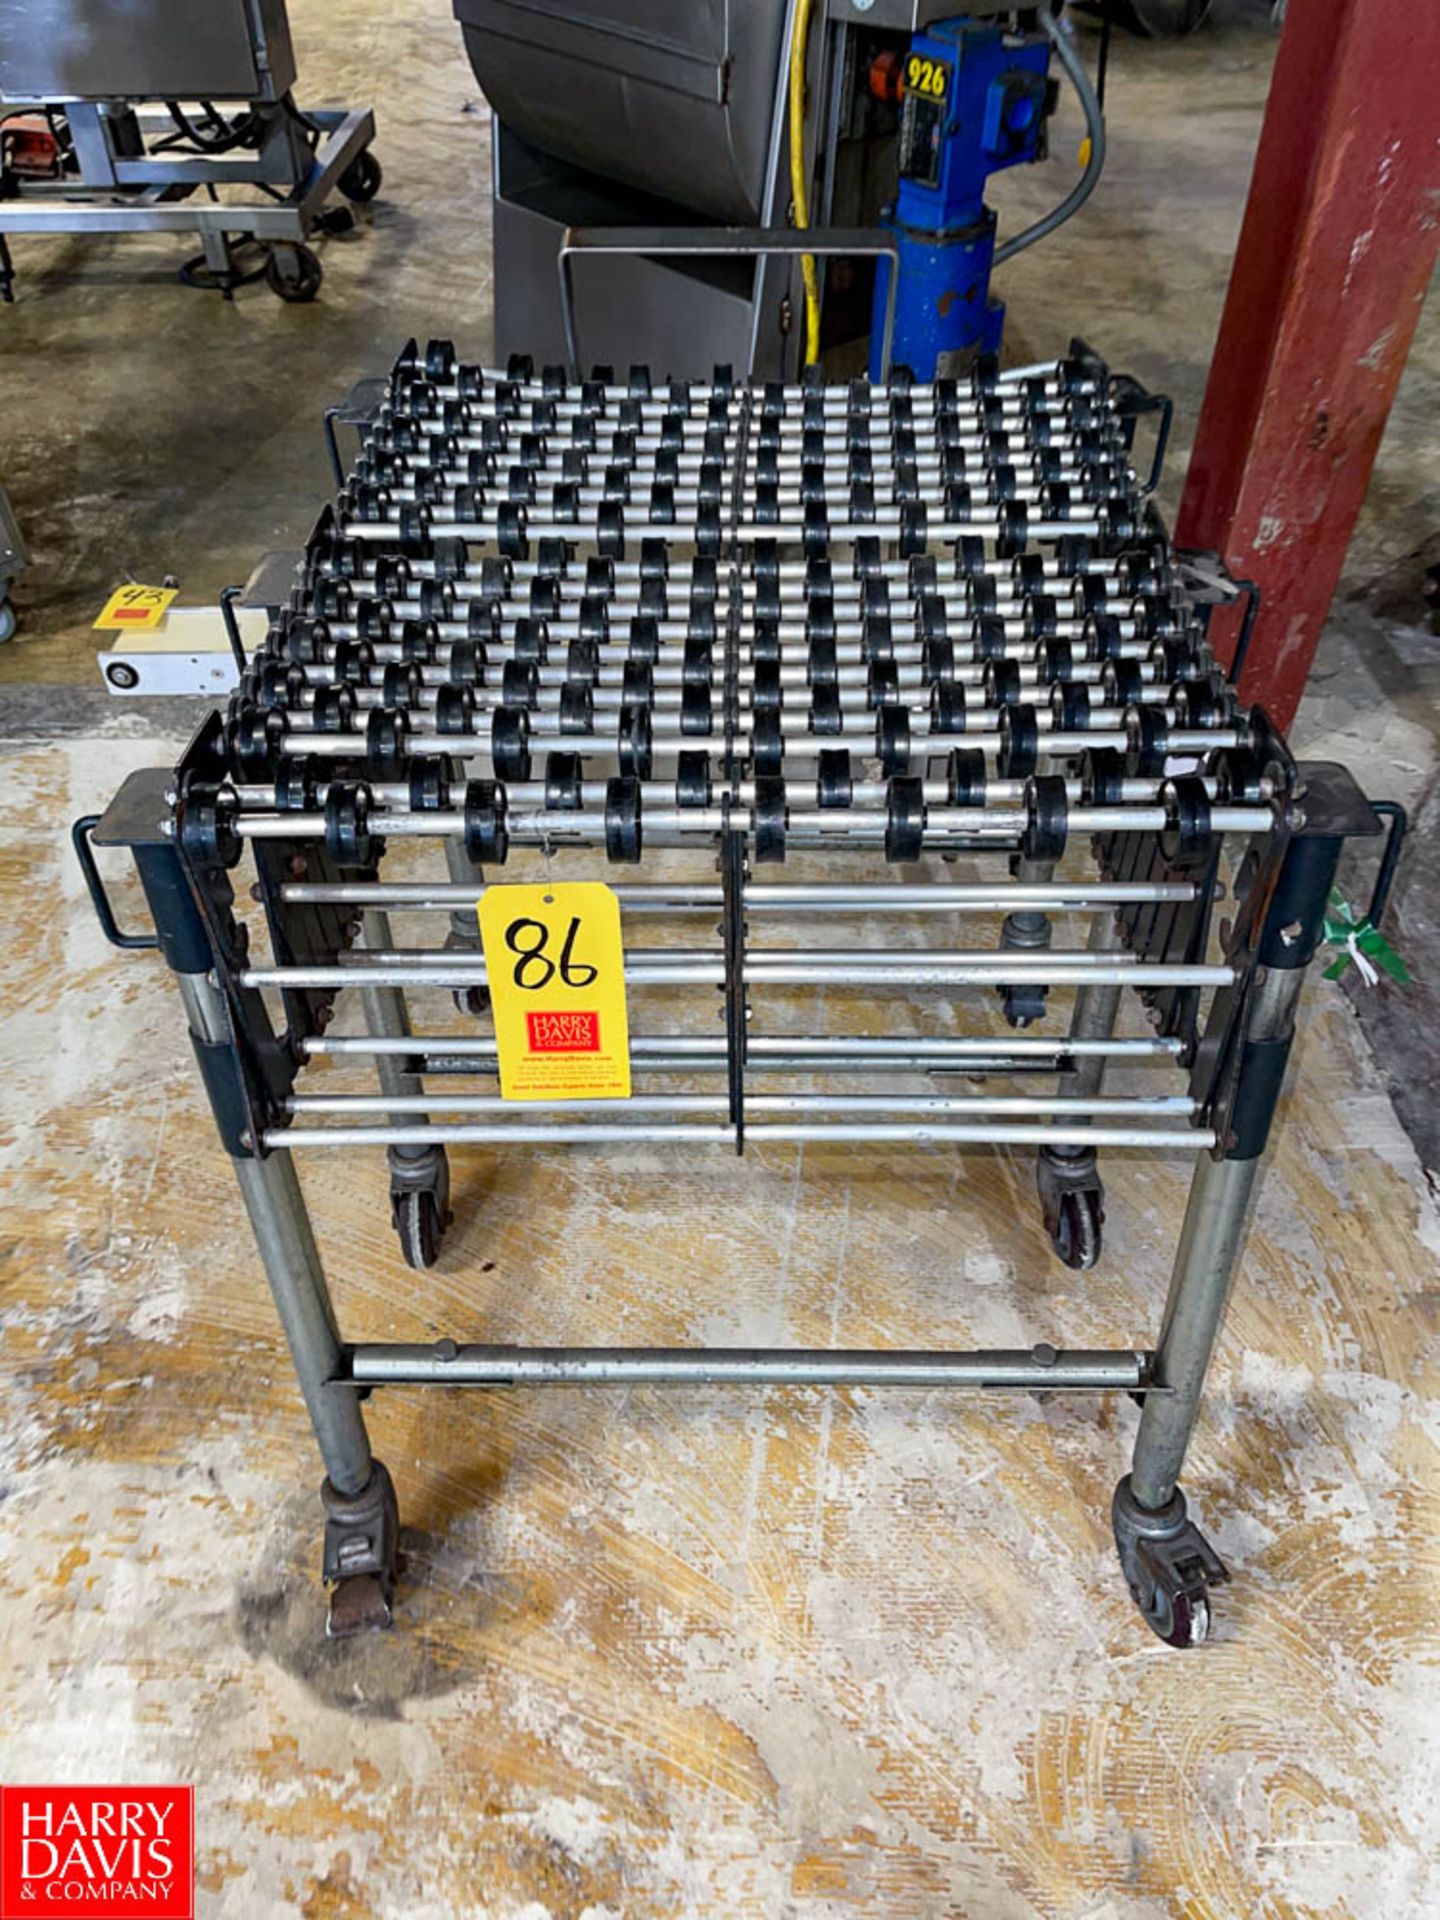 24"" Wide Expandable Conveyor. Rigging Fee: $75